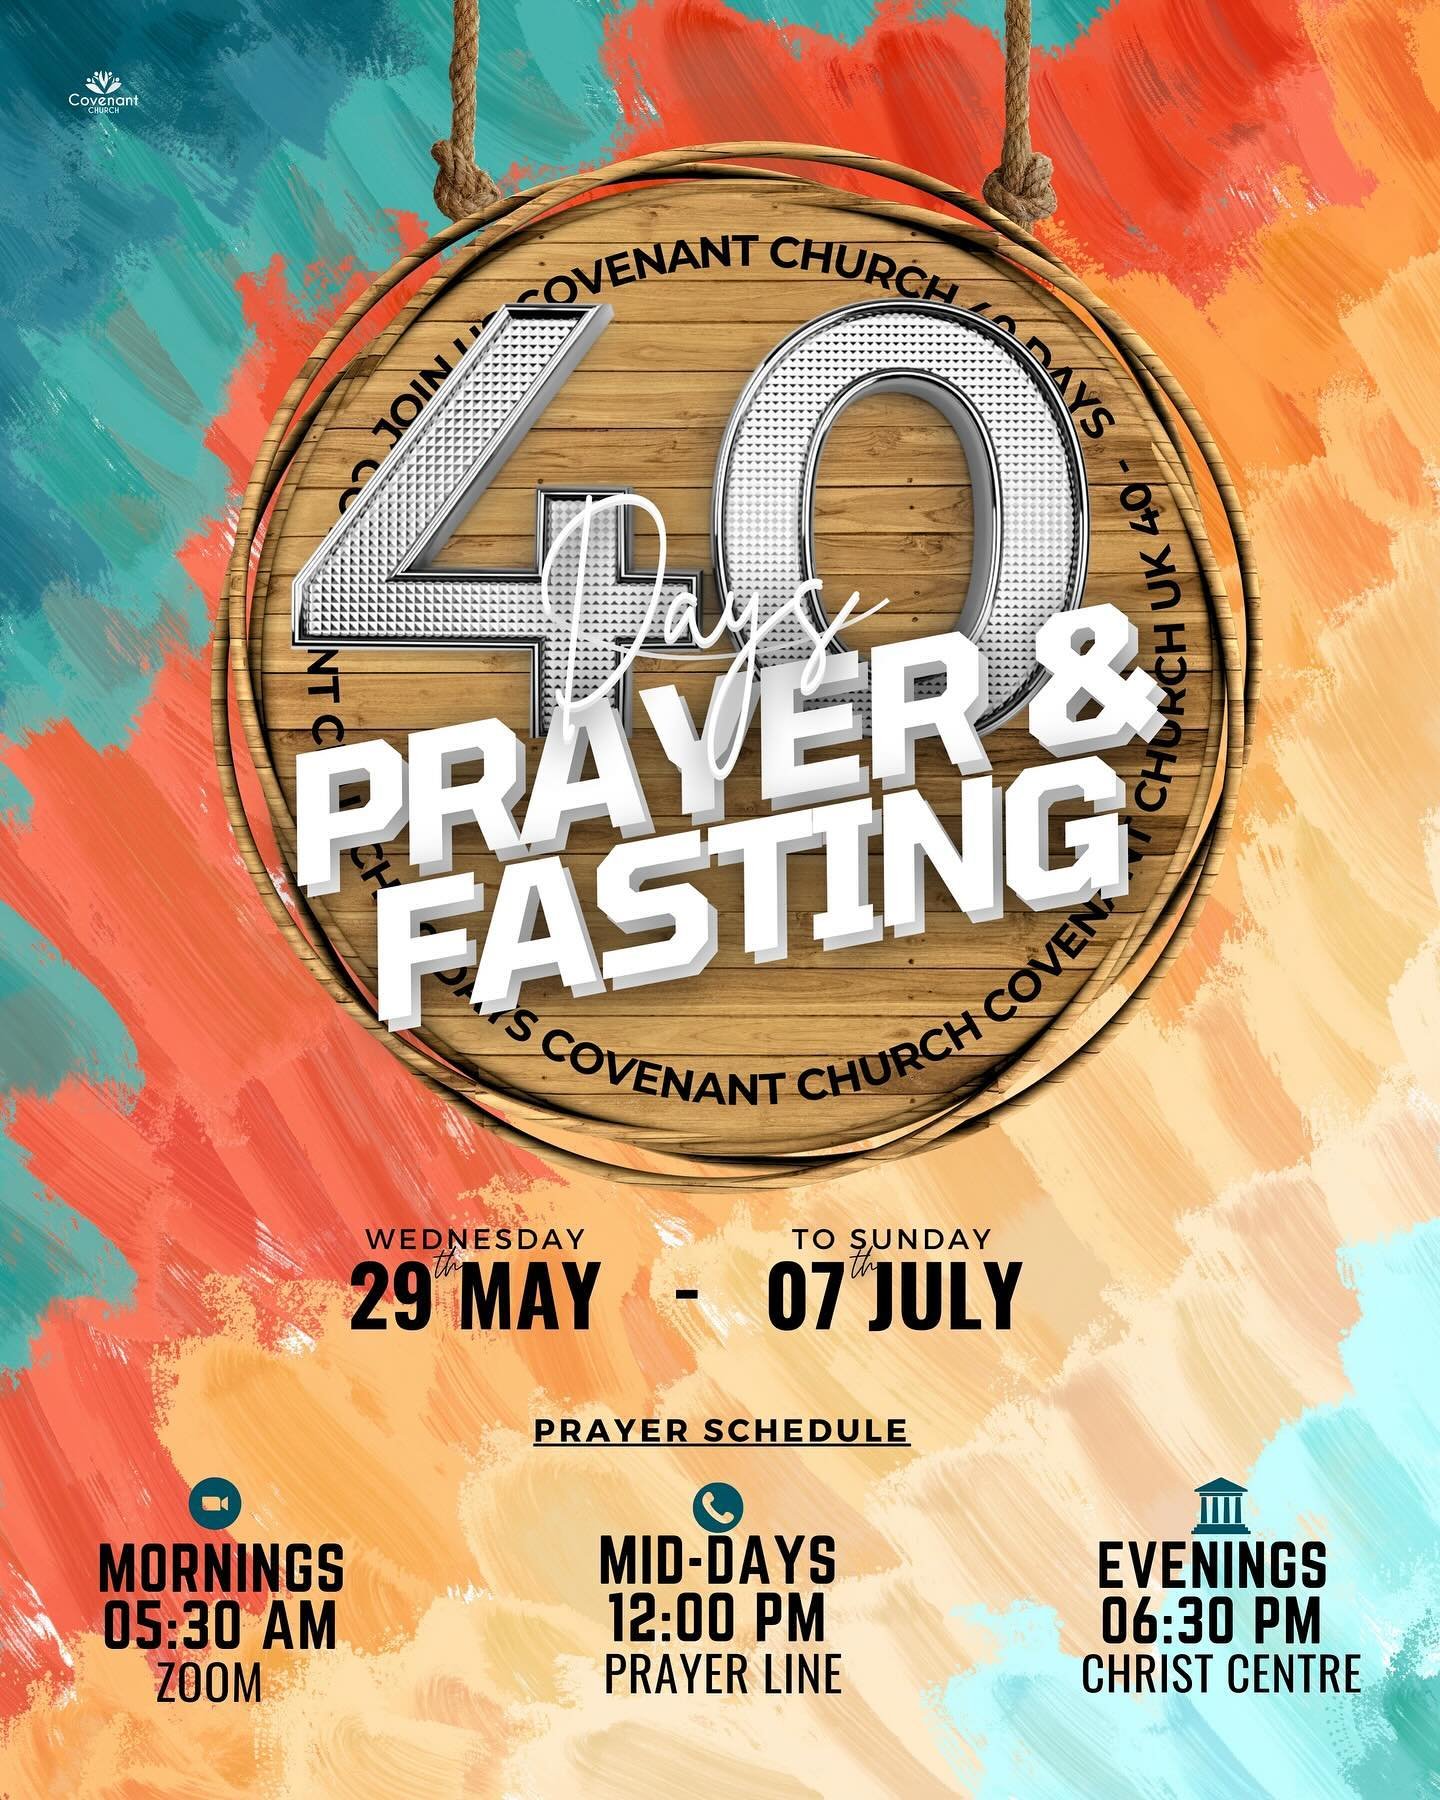 Are you ready? Our 40 day season of prayer and fasting begins tomorrow! 
.
&ldquo;So we fasted and earnestly prayed that our God would take care of us, and he heard our prayer.&rdquo; ‭‭- Ezra‬ ‭8‬:‭23‬ 💫 
.
#prayer #fasting #season #40days #miracle